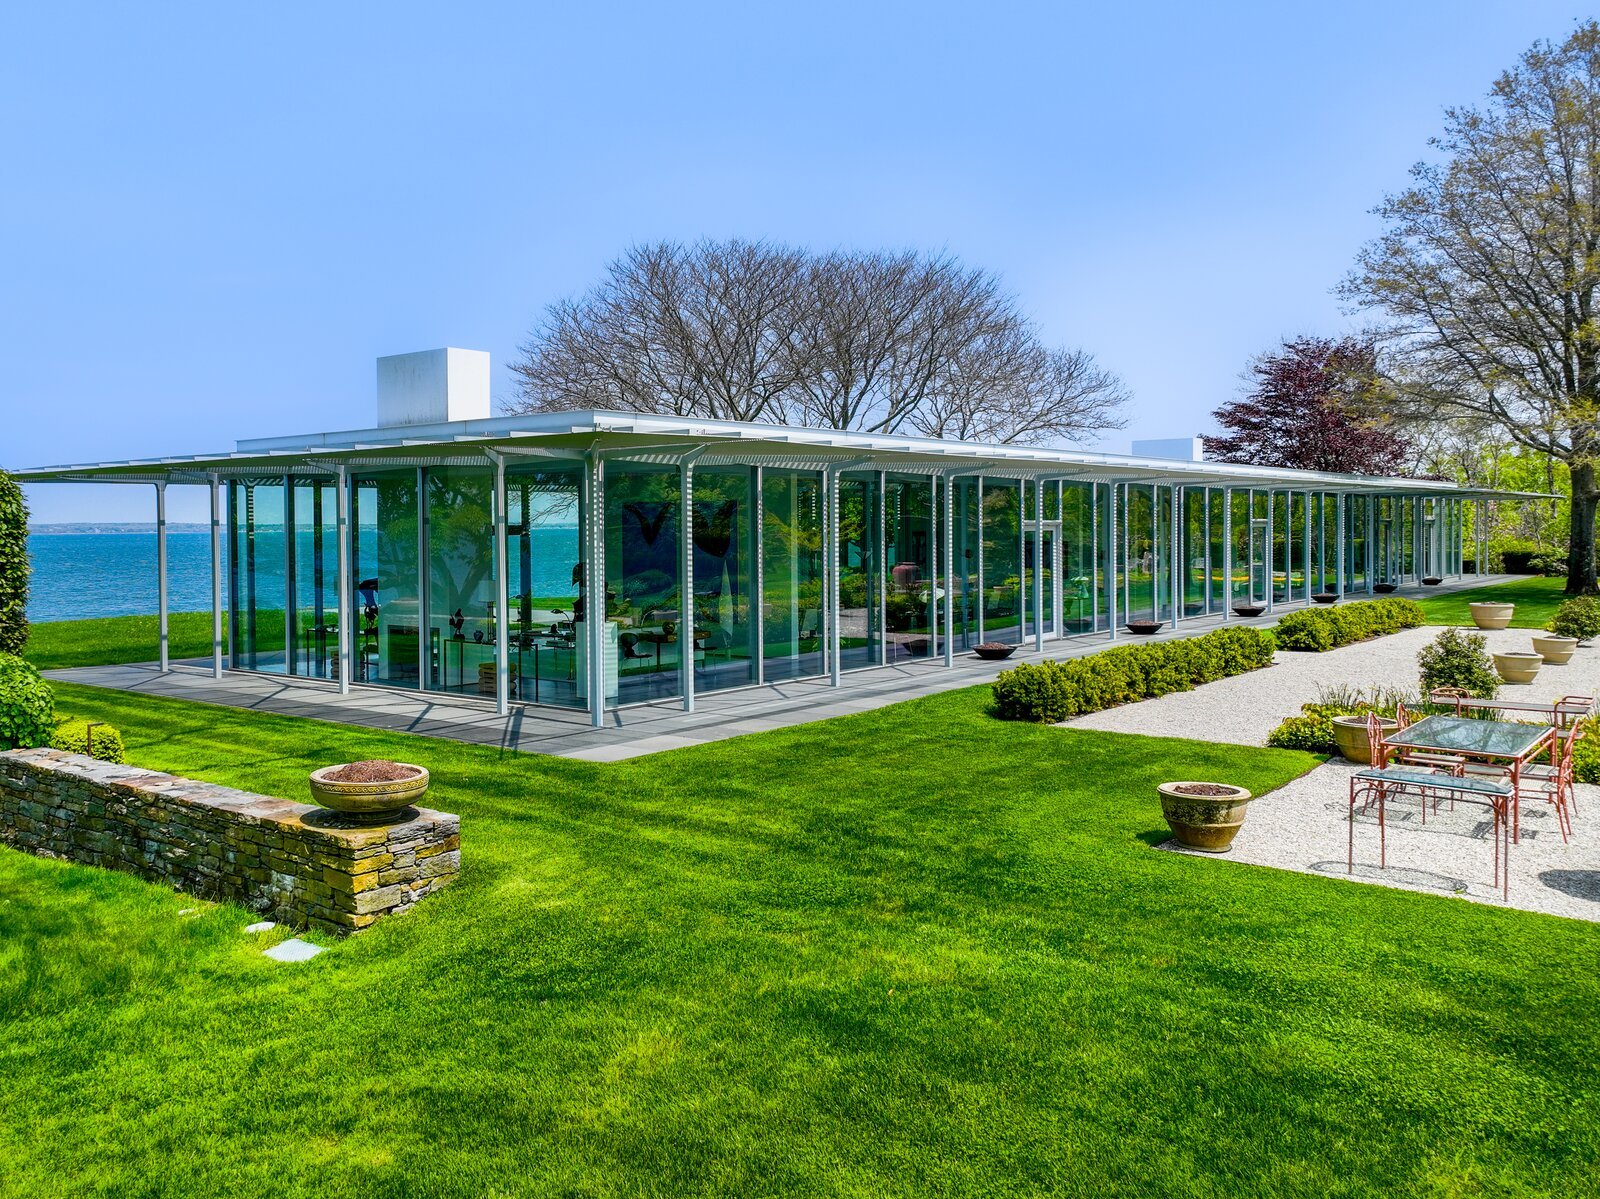 If You Crave Ocean Views, This Glass House Off the Coast of New York Is a Clear Choice